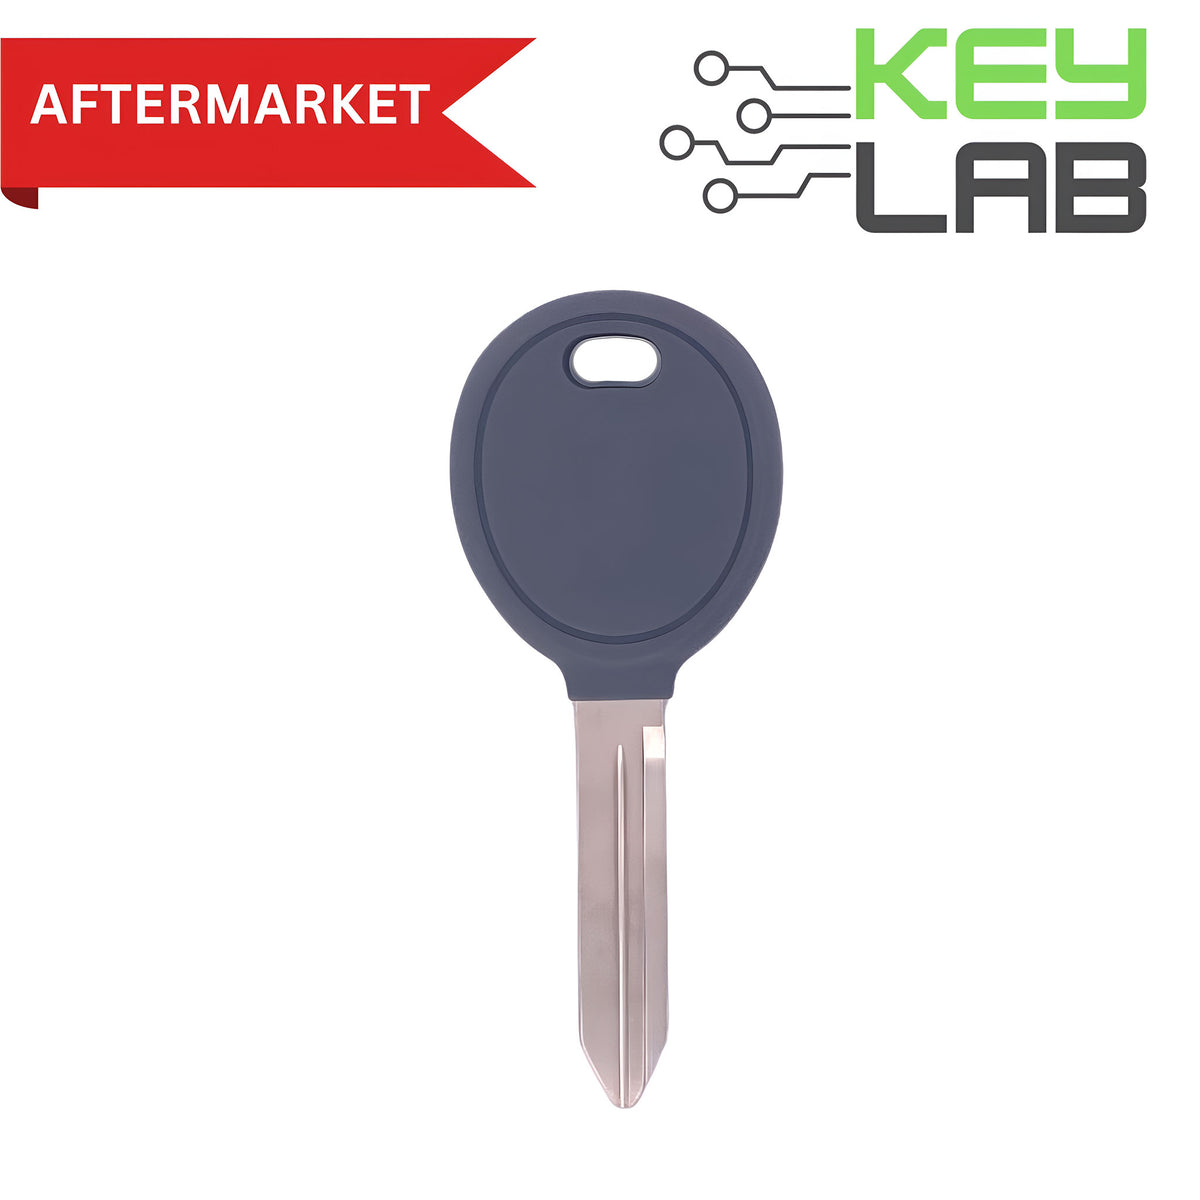 Chrysler Aftermarket 2005-2019 Pacifica, Sebring, Town & Country, RAM, Durango, Compass Transponder Key Y164-PT PN# 05102247AA - Royal Key Supply